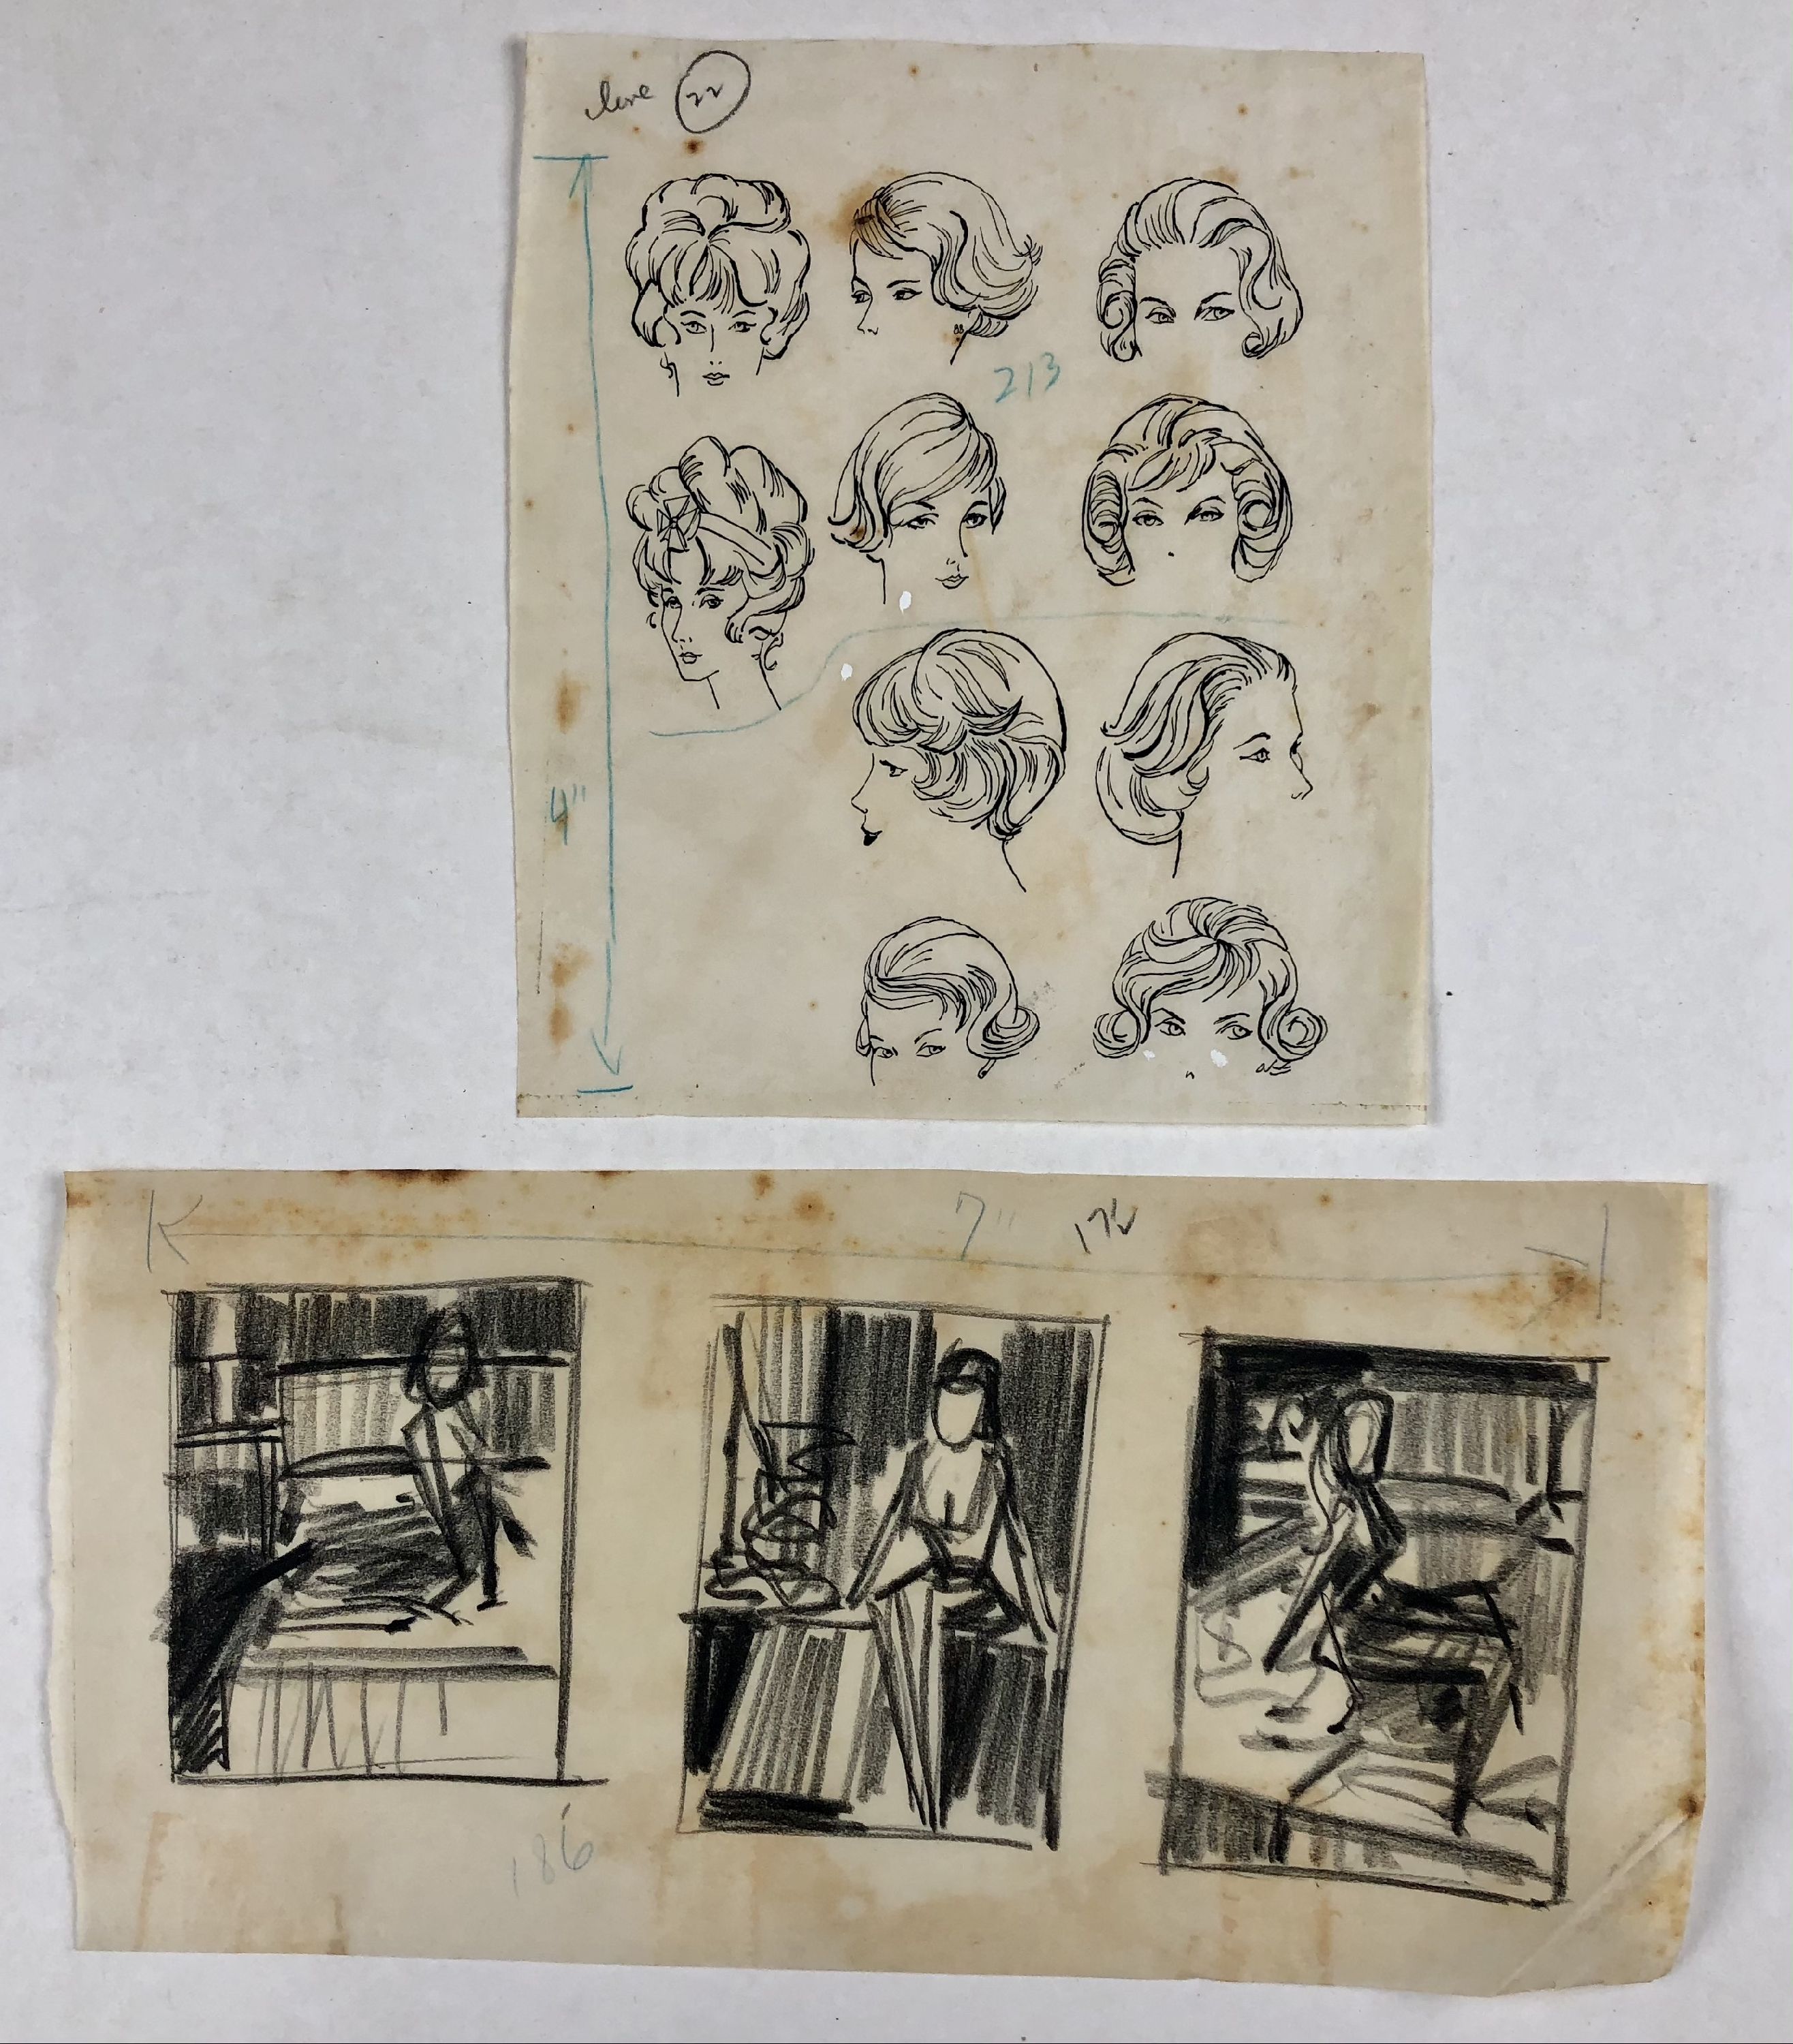 1 small sheet featuring 10 ink studies of face and hair of various women; 1 small sheet of 3 rough charcoal sketches of woman seated on bed